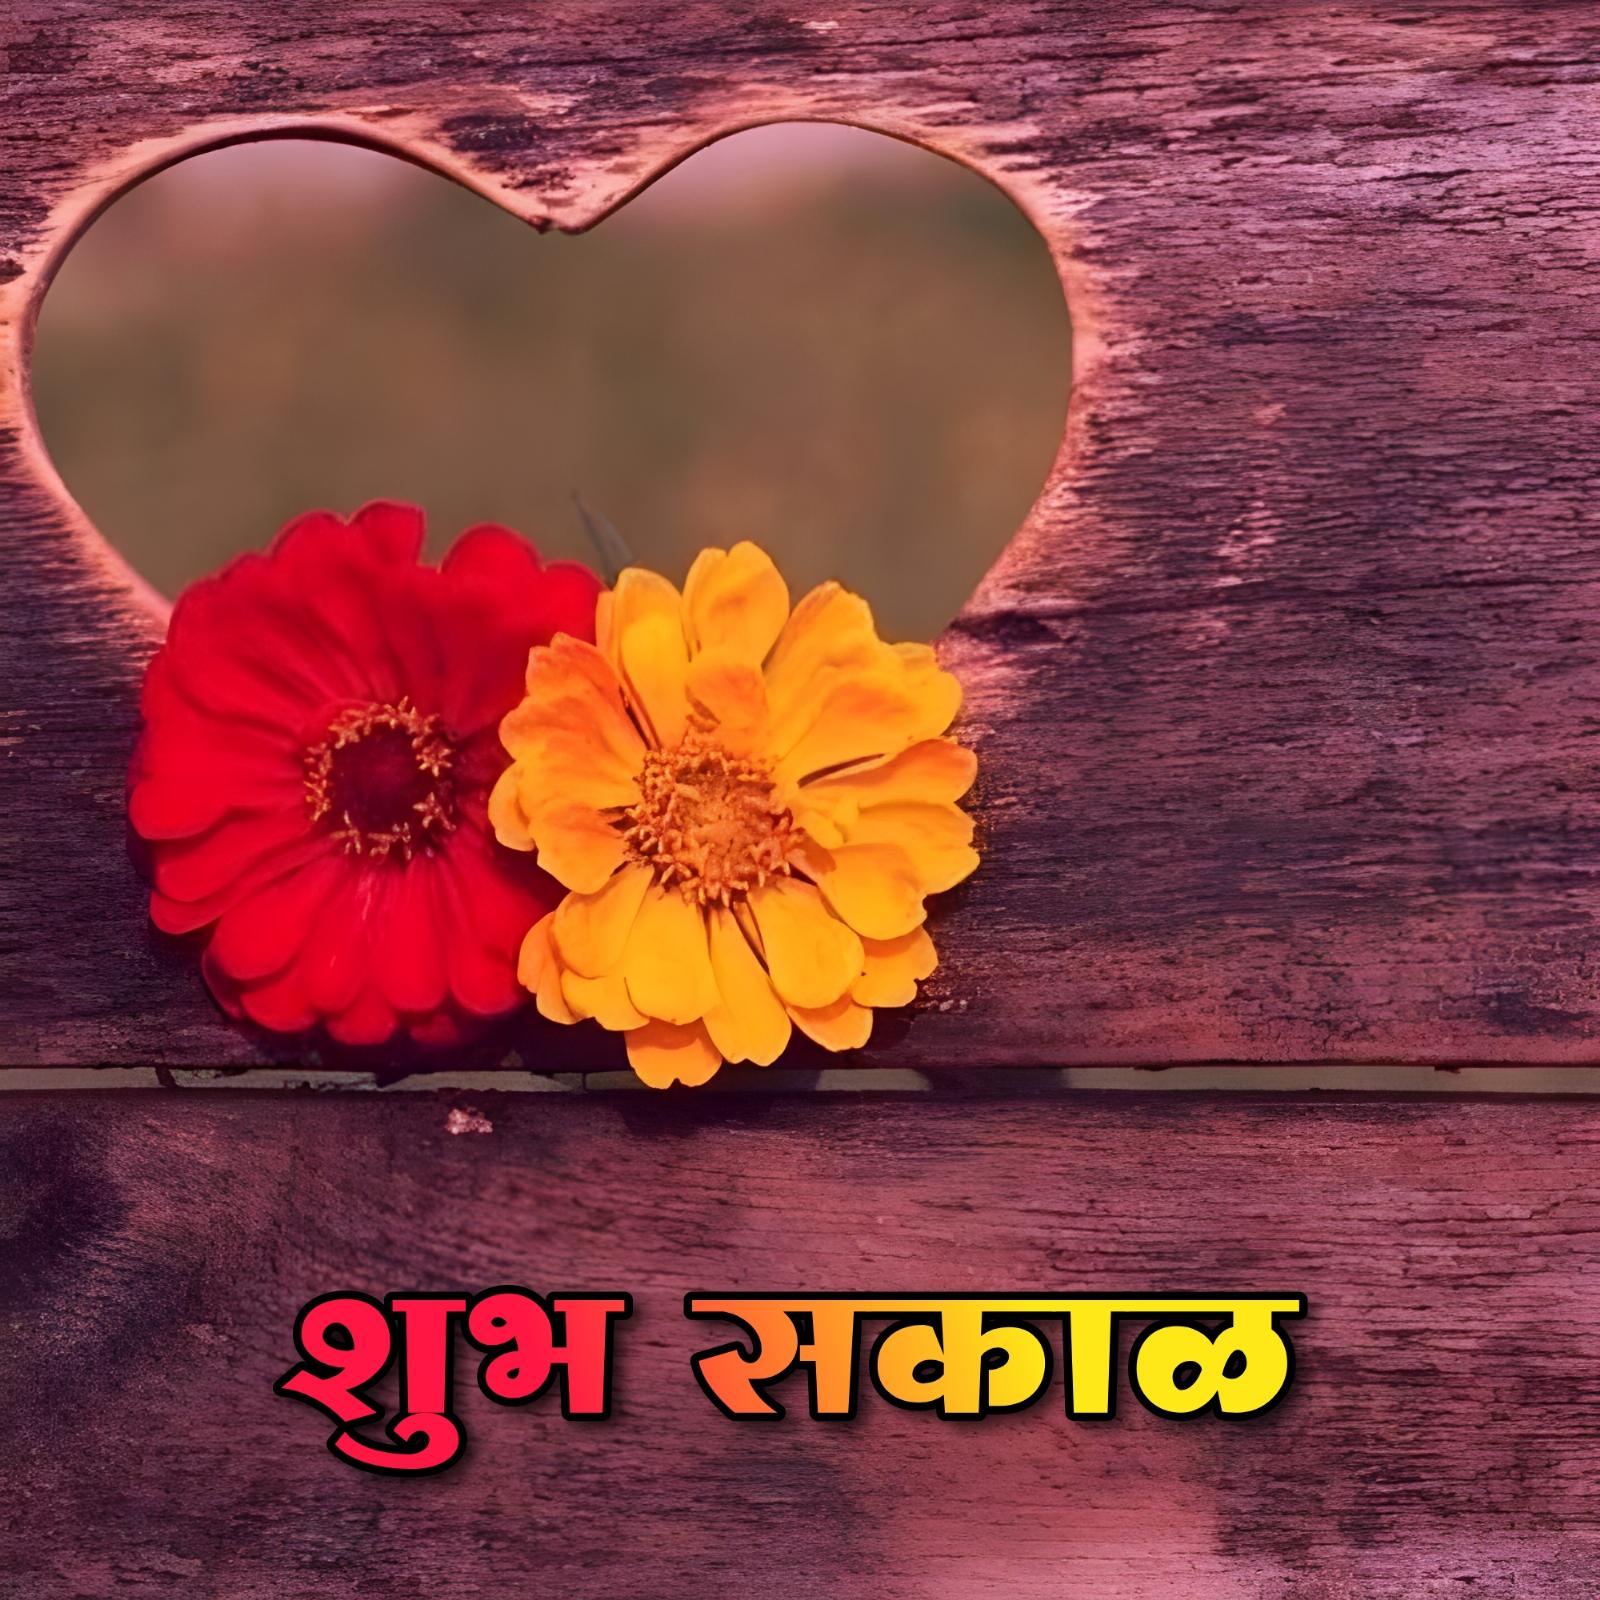 Shubh Sakal With The Flower Images